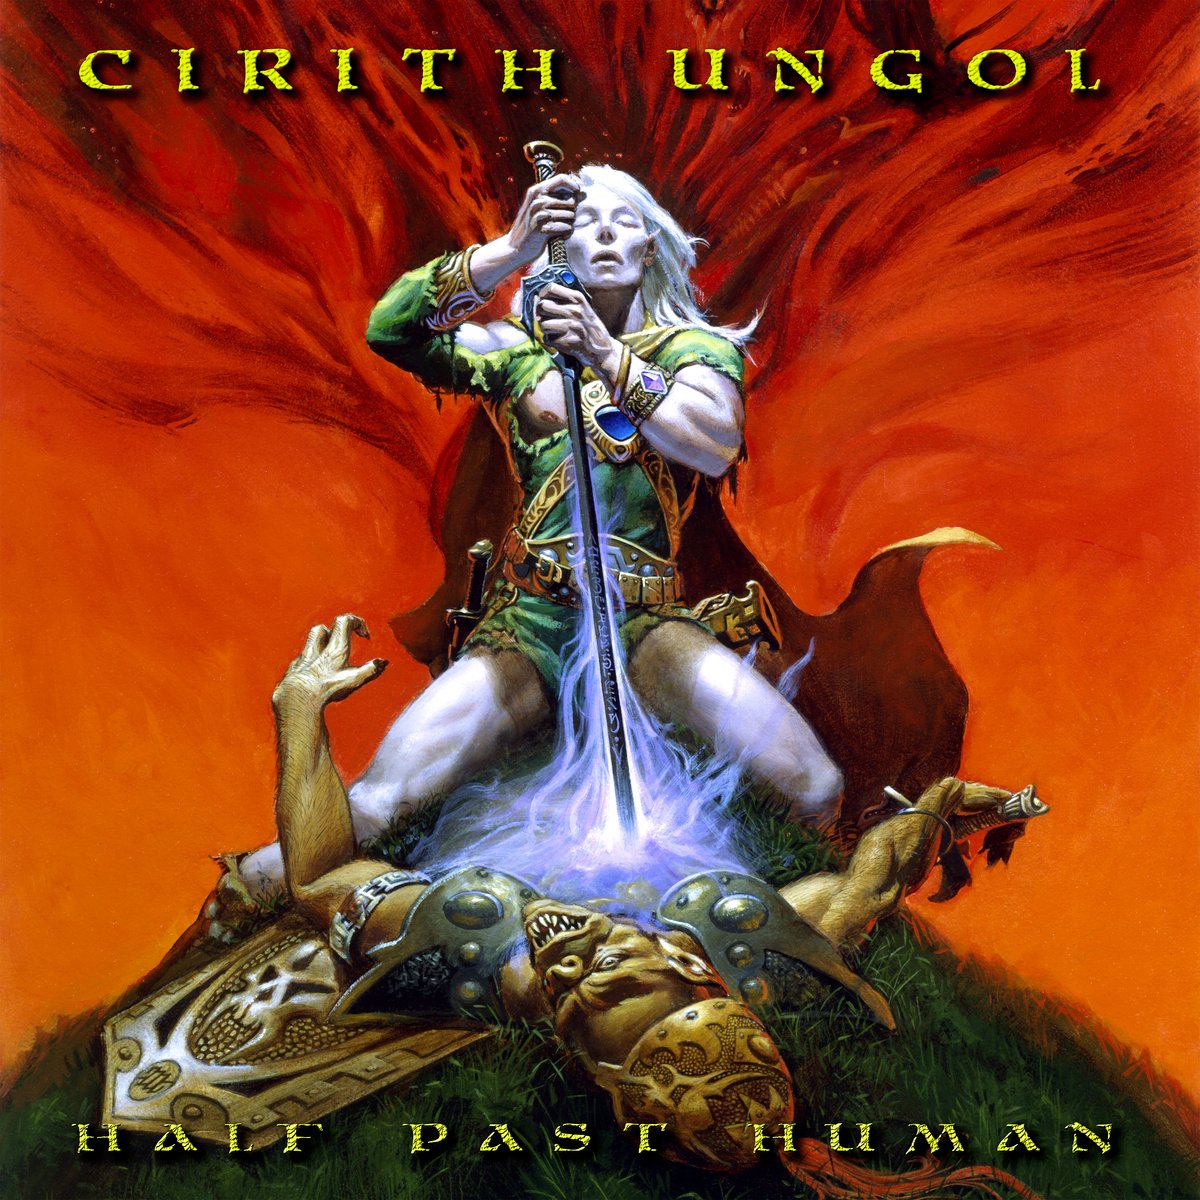 E2 BfWHUcAEYTRB Cirith Ungol Online Most comprehensive and awesome resource for Cirith Ungol RT @MetalBlade: "...there’s some serious sword swinging power metal happening here..." - @outburnmag @CirithU • #HalfPastHuman
...